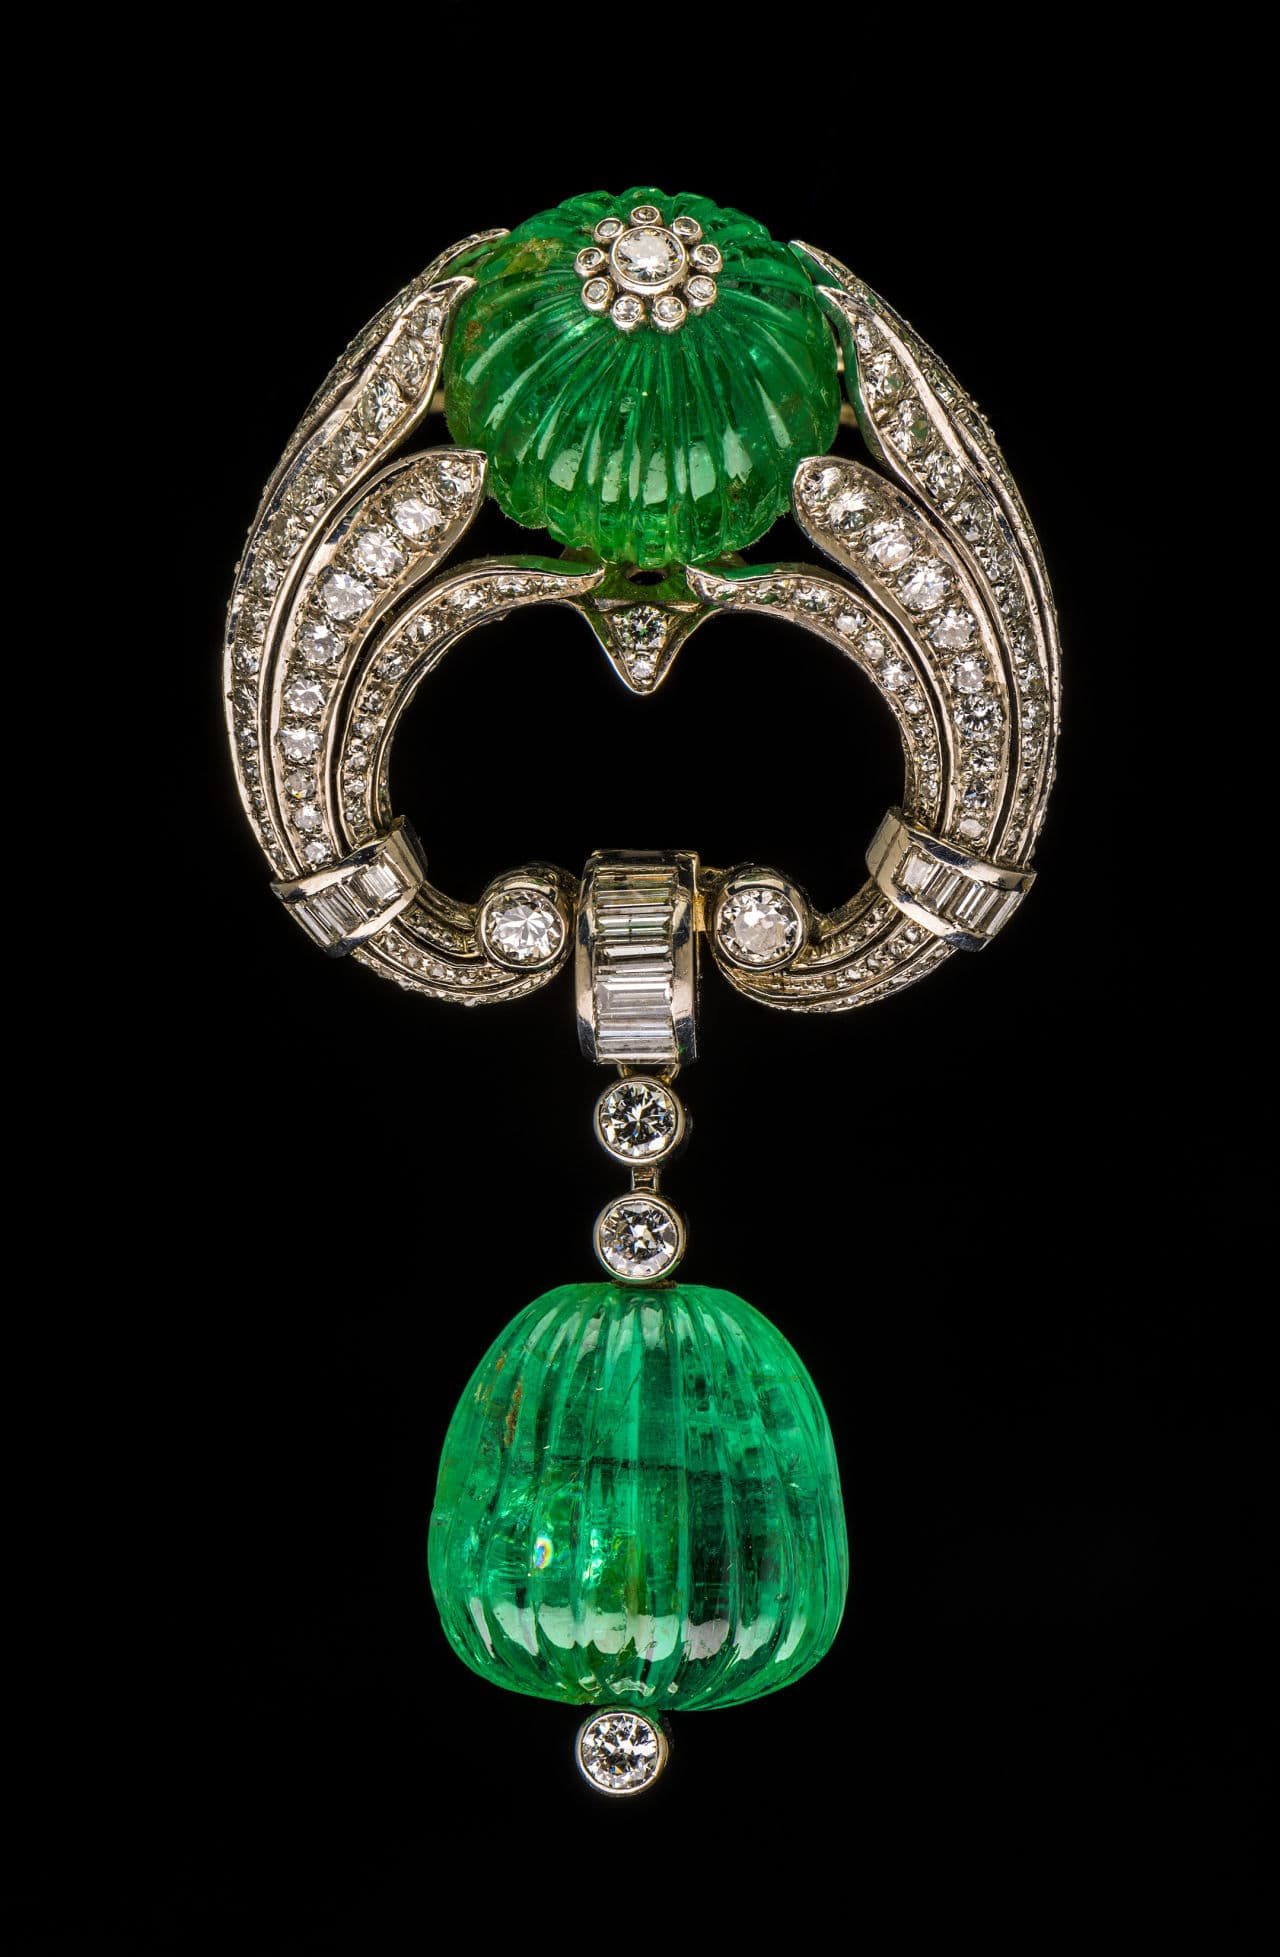 Art Deco platinum, carved emerald and diamond brooch about 1937 platinum, white gold, emeralds and diamonds. Gift of the heirs of Bettina Looram de Rothschild. (Courtesy Museum of Fine Arts, Boston)